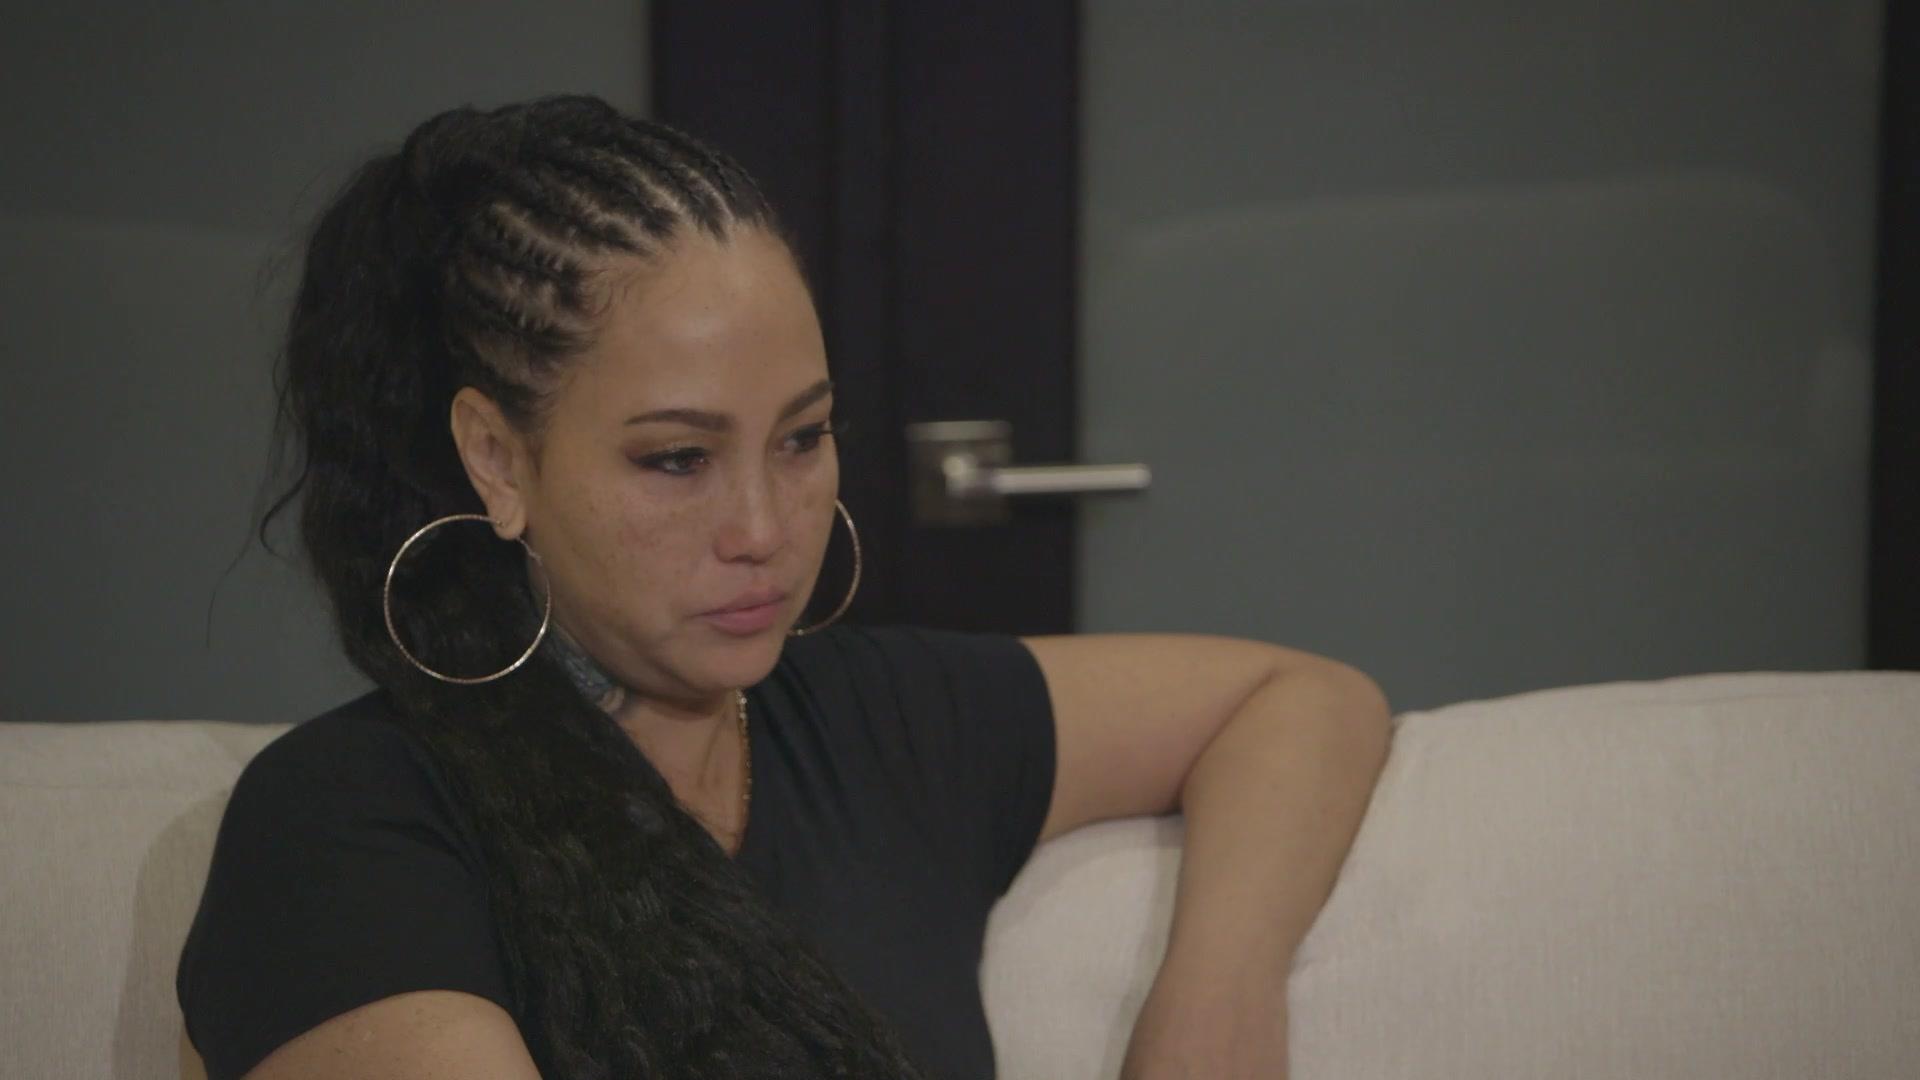 Watch Toni: 'Nothing Is Changing...I'm Ready To Leave' | Marriage Boot Camp: Hip Hop Edition Video Extras